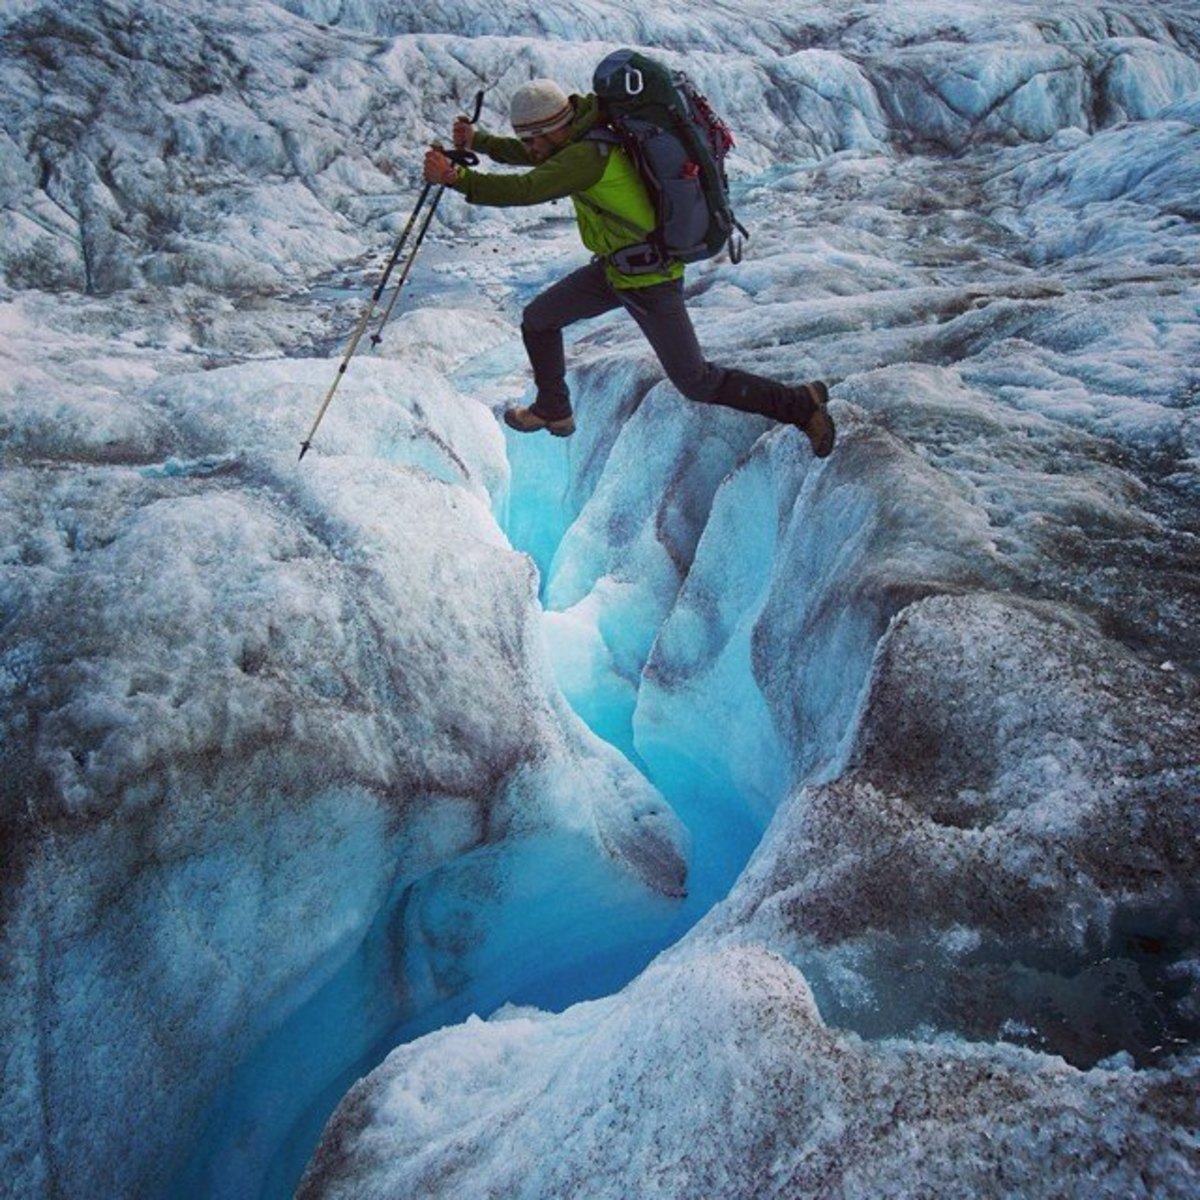 Alan Davis leaps over a crevasse on lower Ruth Glacier. Huey reported that some of the icy blue gaps were hundreds of feet deep. Photo by Aaron Huey from Facebook and Instagram